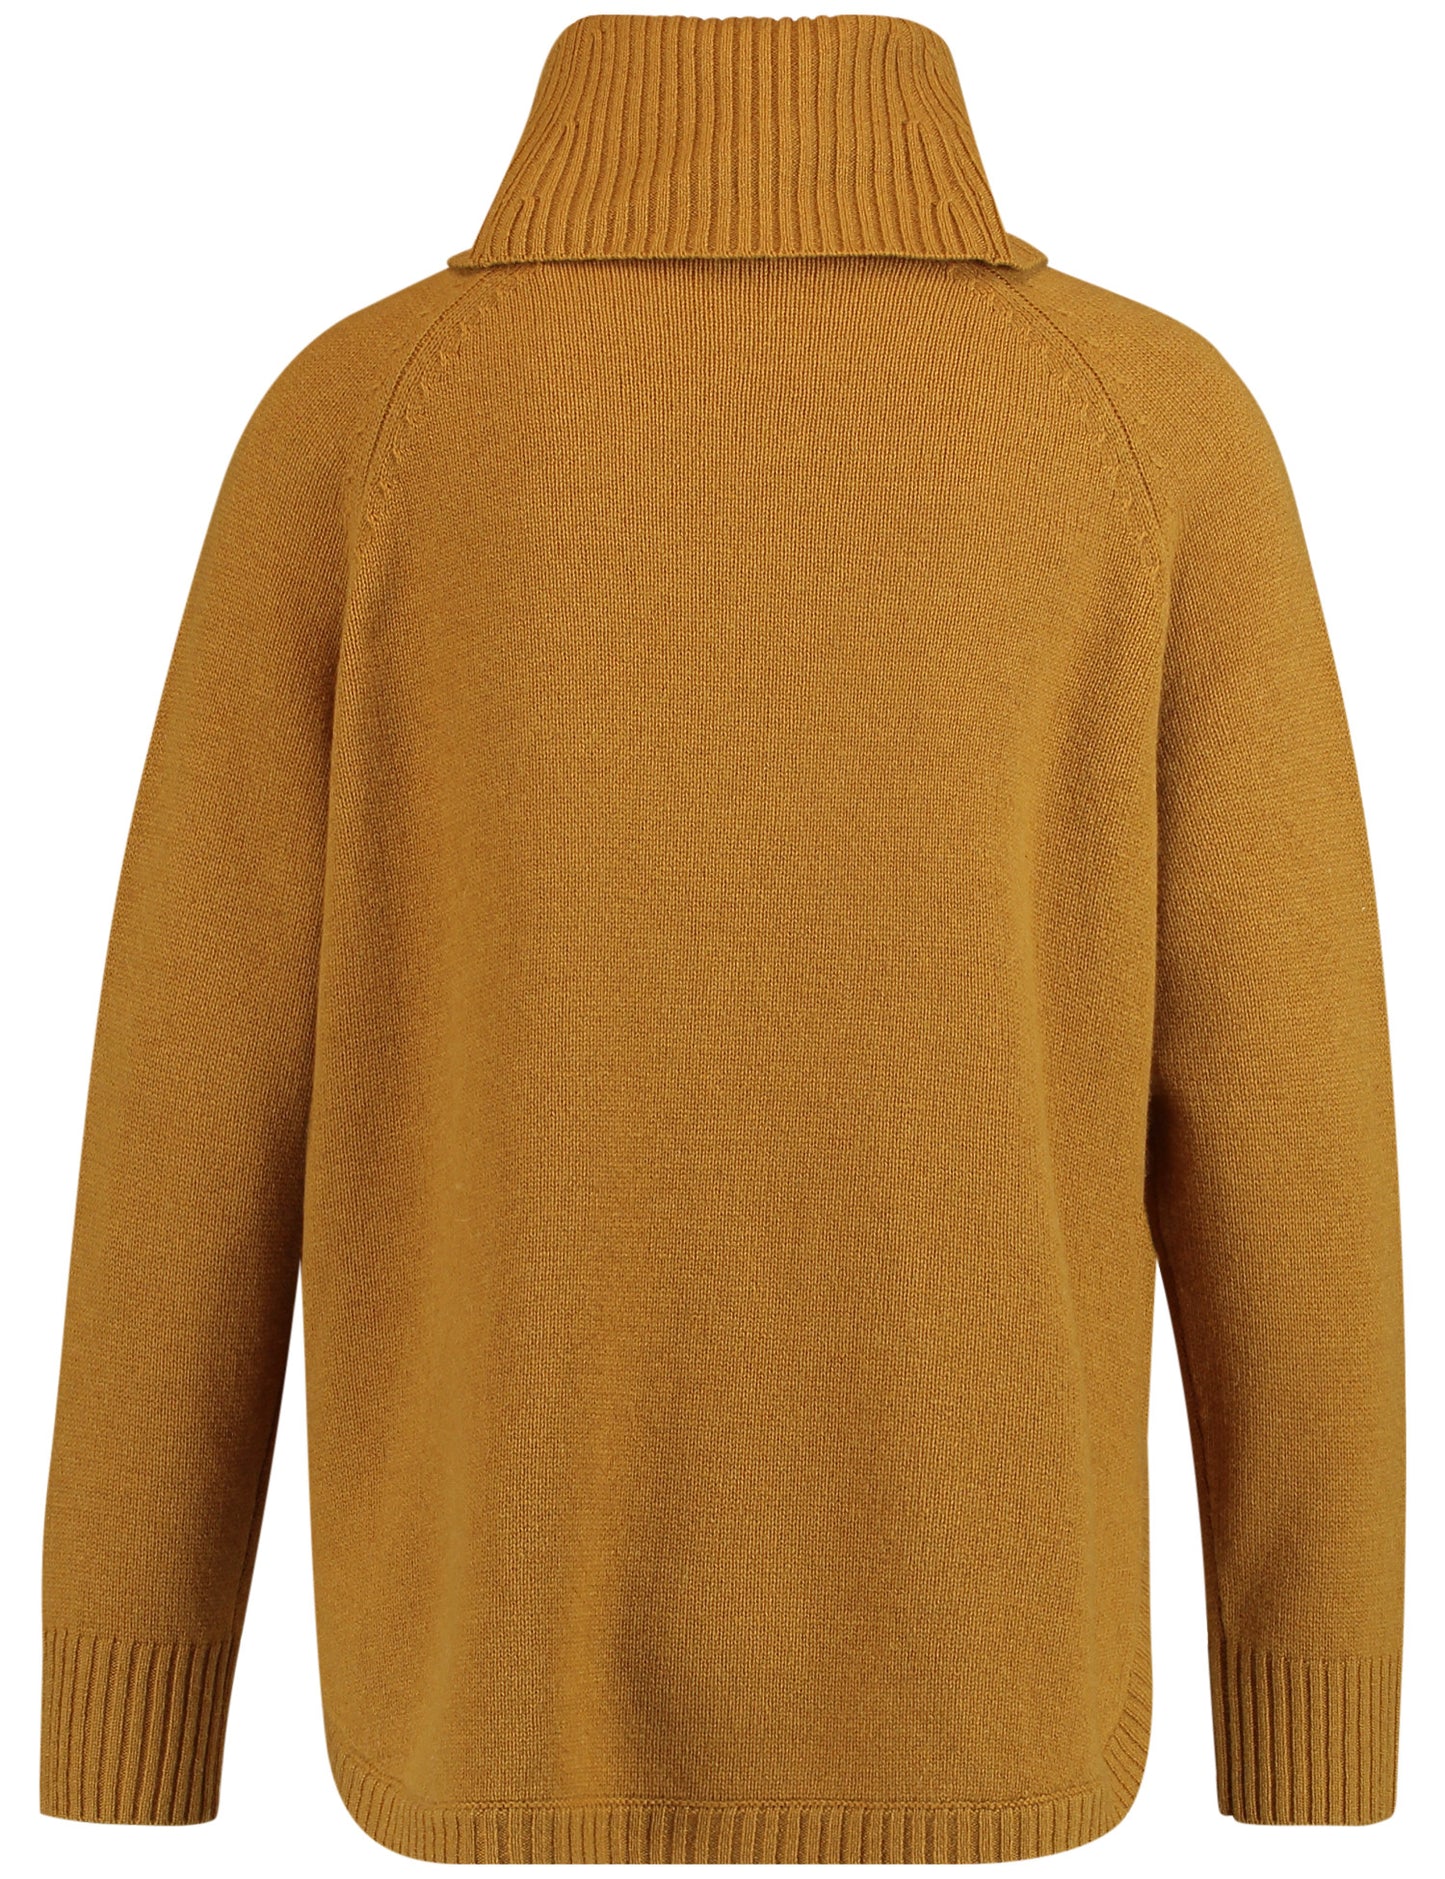 SWEATER ROLL NECK